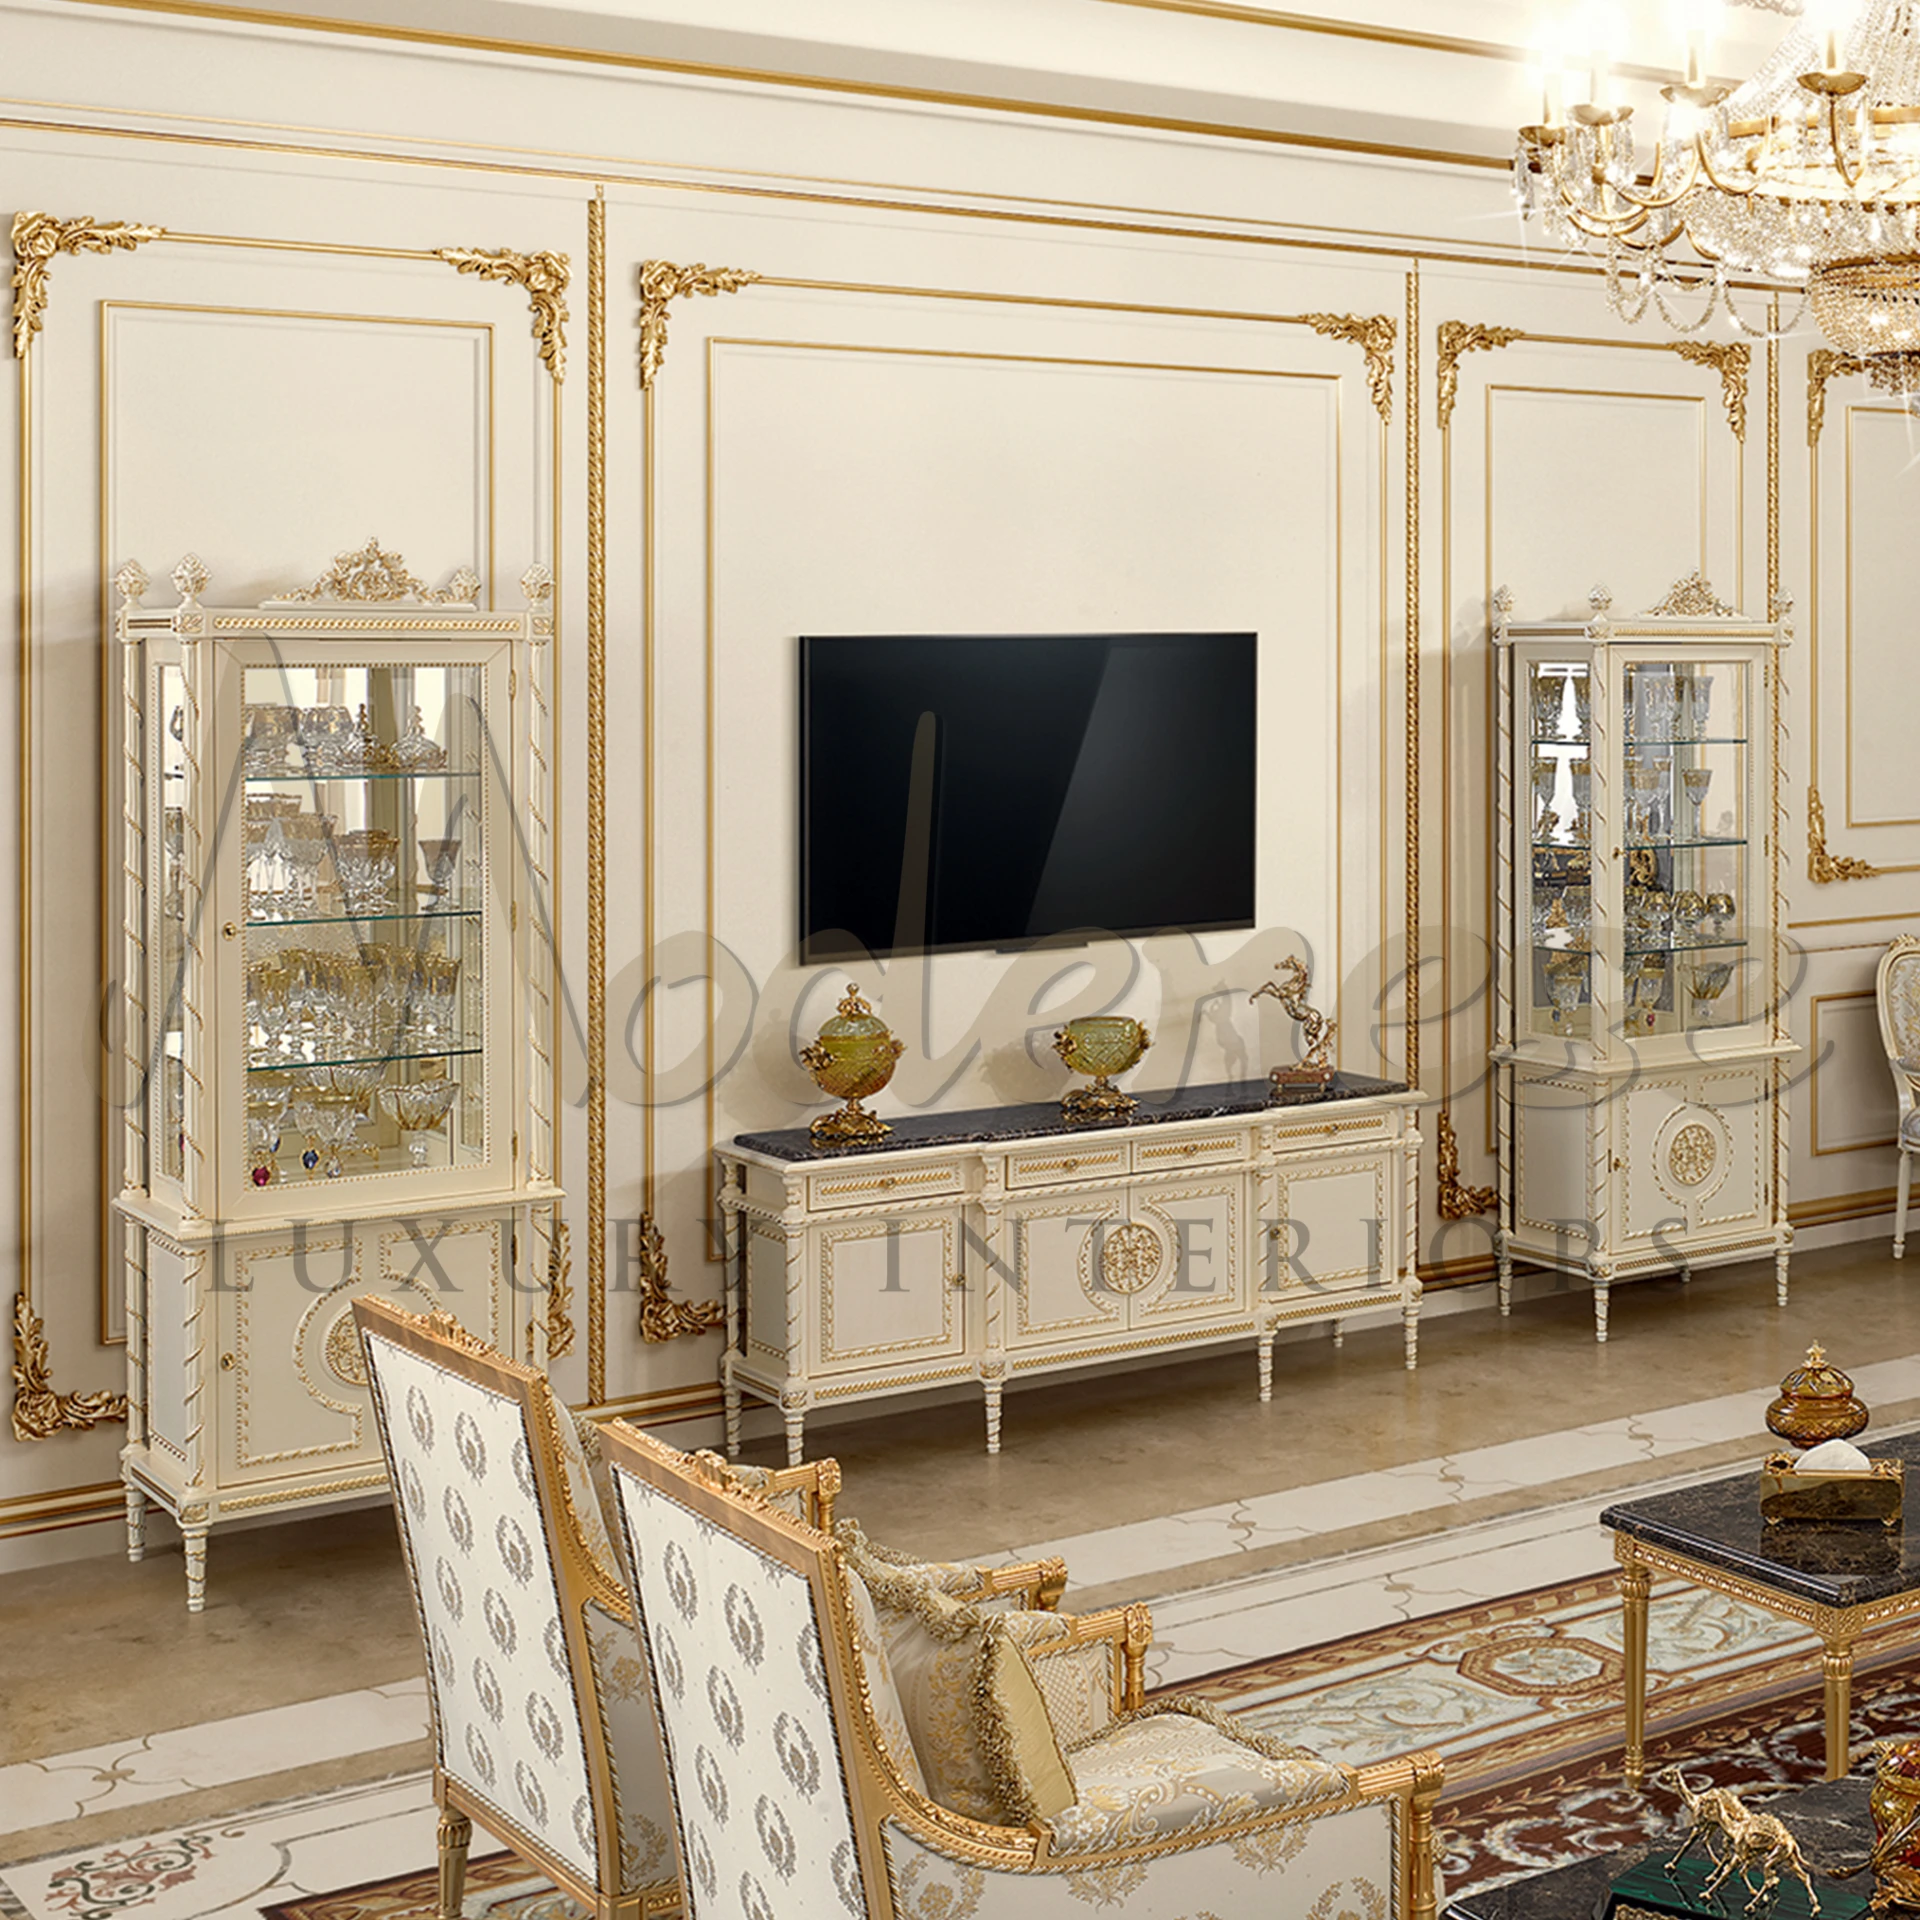 Luxurious sitting room featuring white cabinets with glass doors, gilded accents, and fancy furnishing